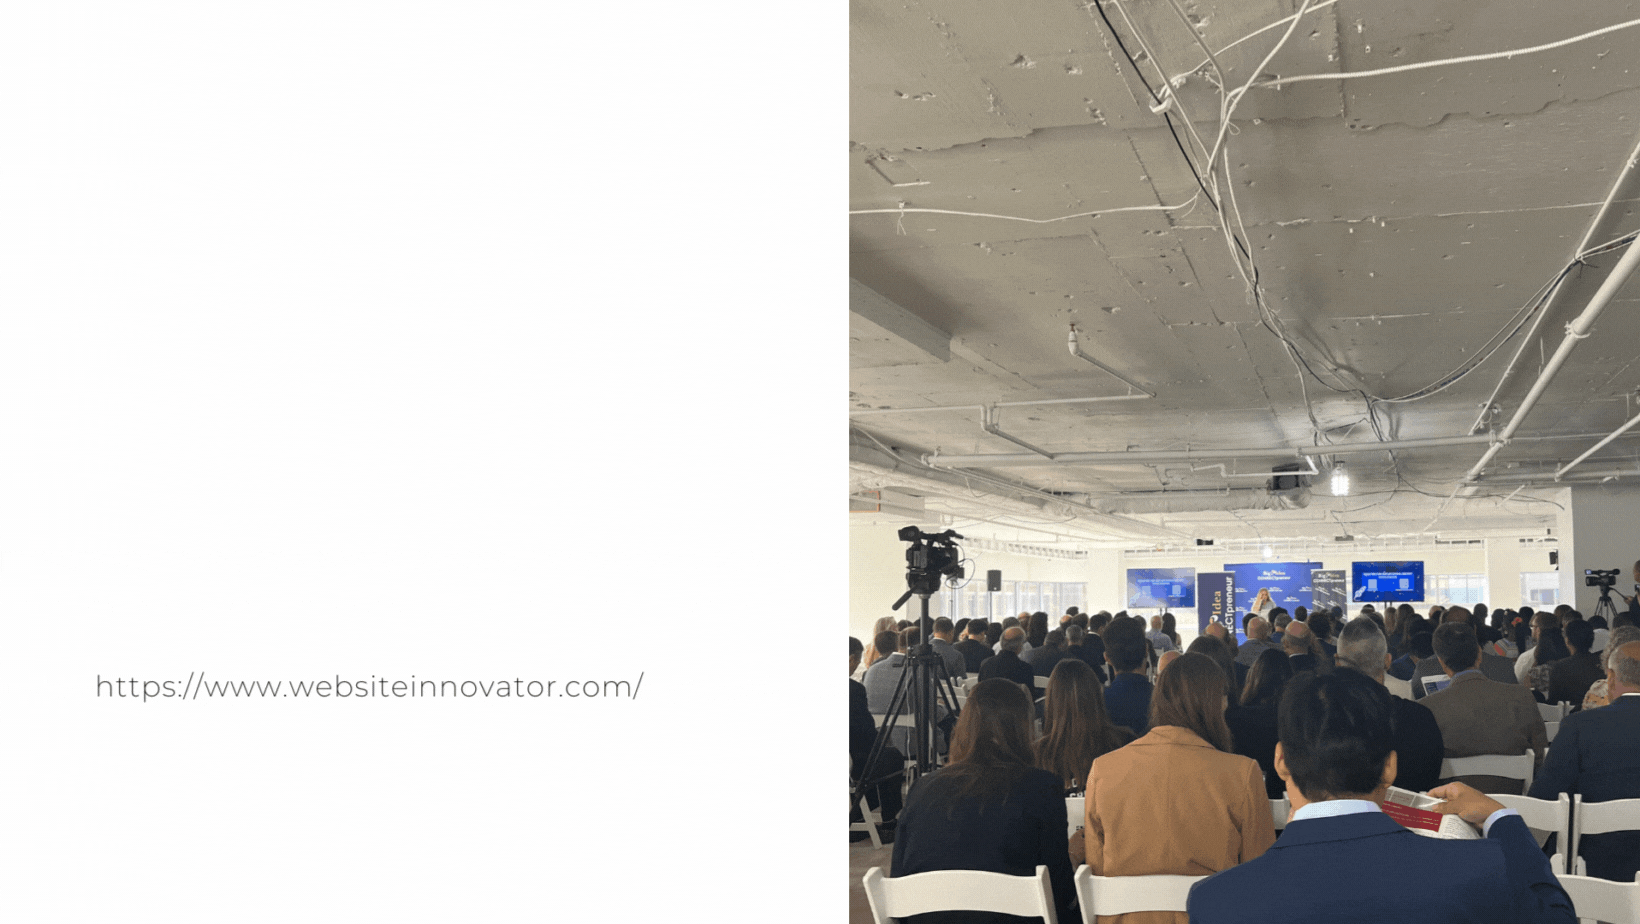 Unpacking the Future: Highlights from the Big Idea CONNECTpreneur Event